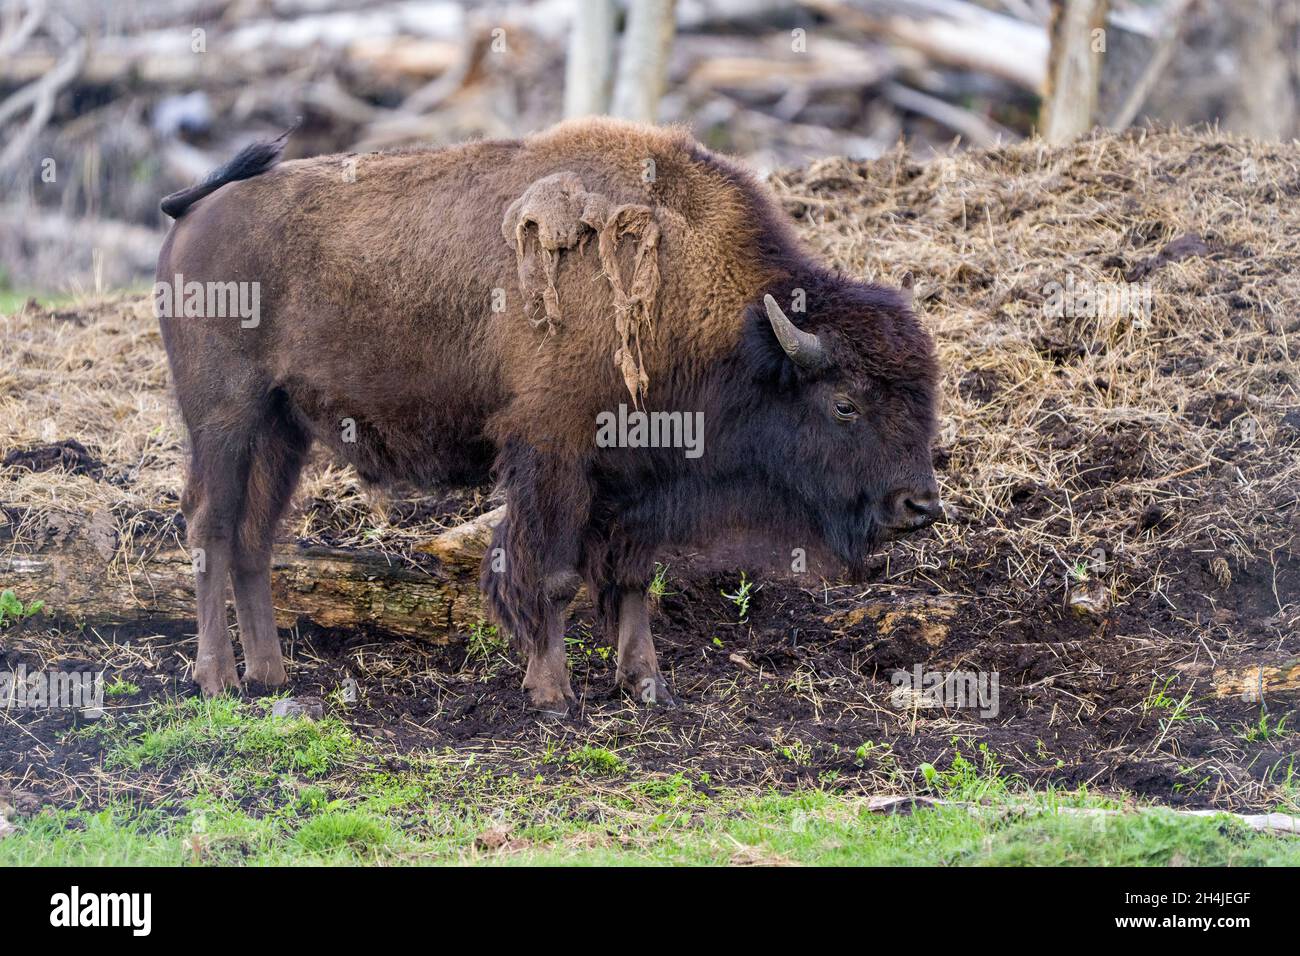 Bison close-up side view displaying large body and horns in its environment and habitat surrounding. Buffalo Picture. Stock Photo